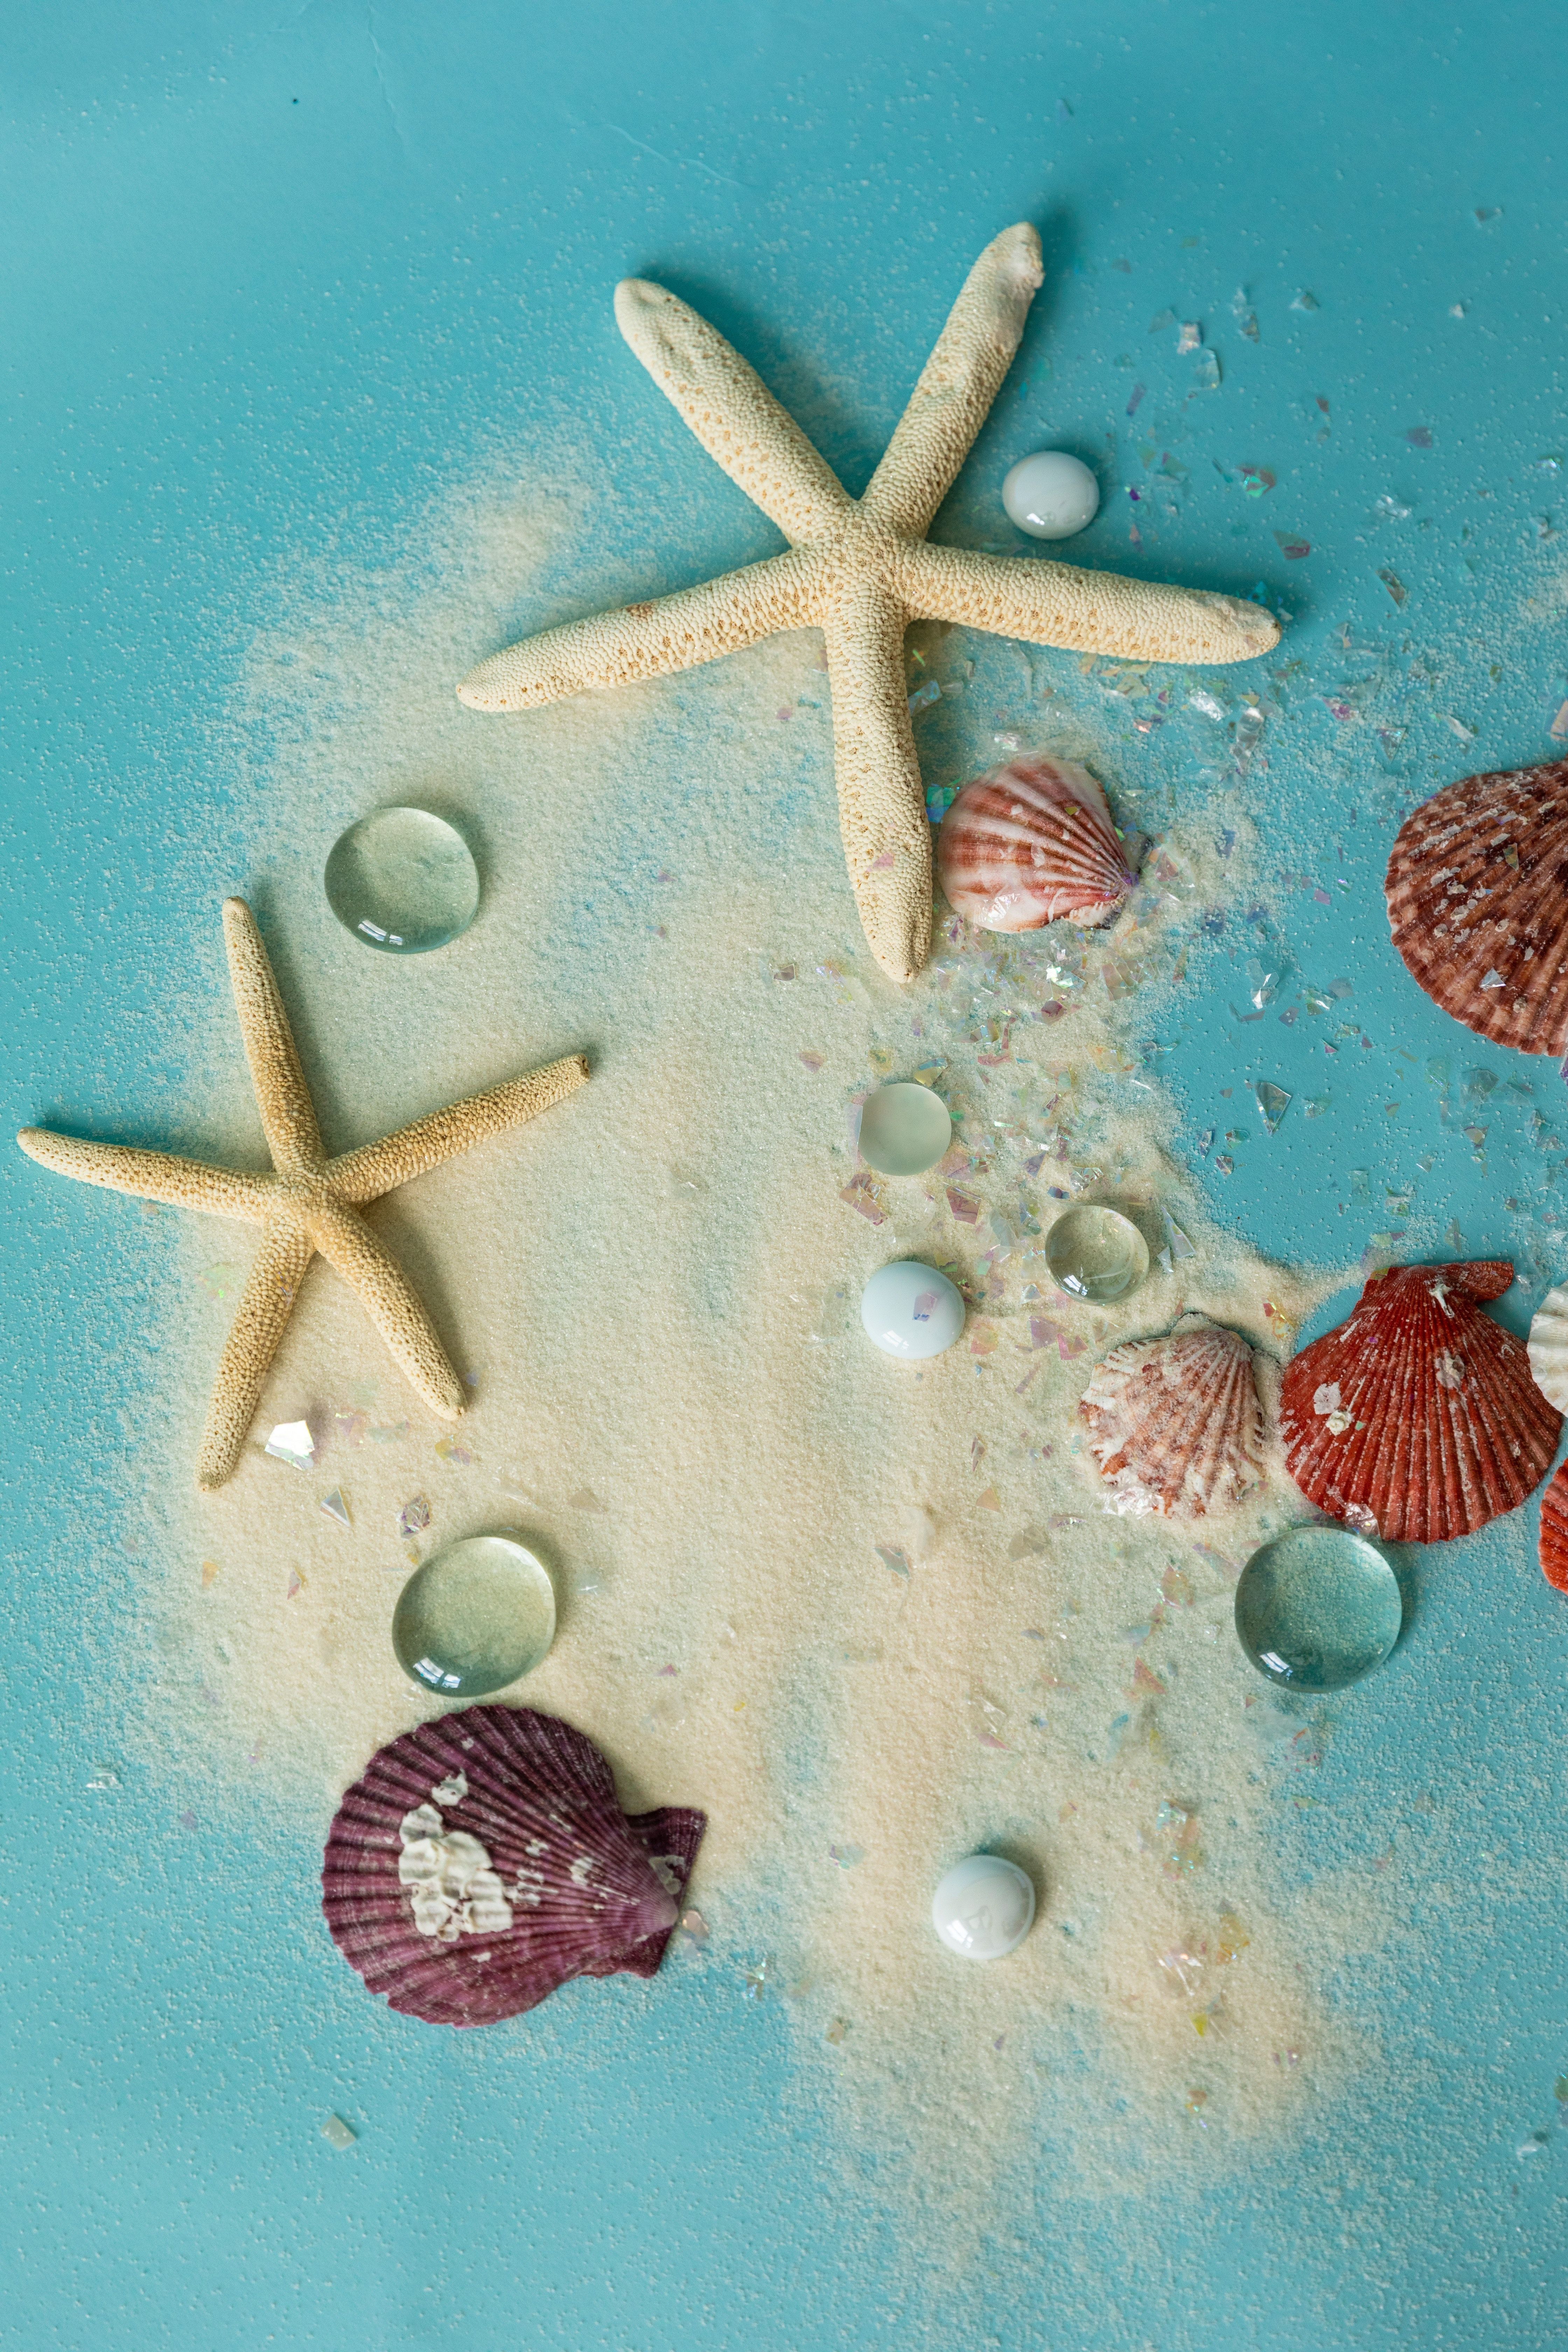 Starfish and Seashells on a Blue Surface · Free